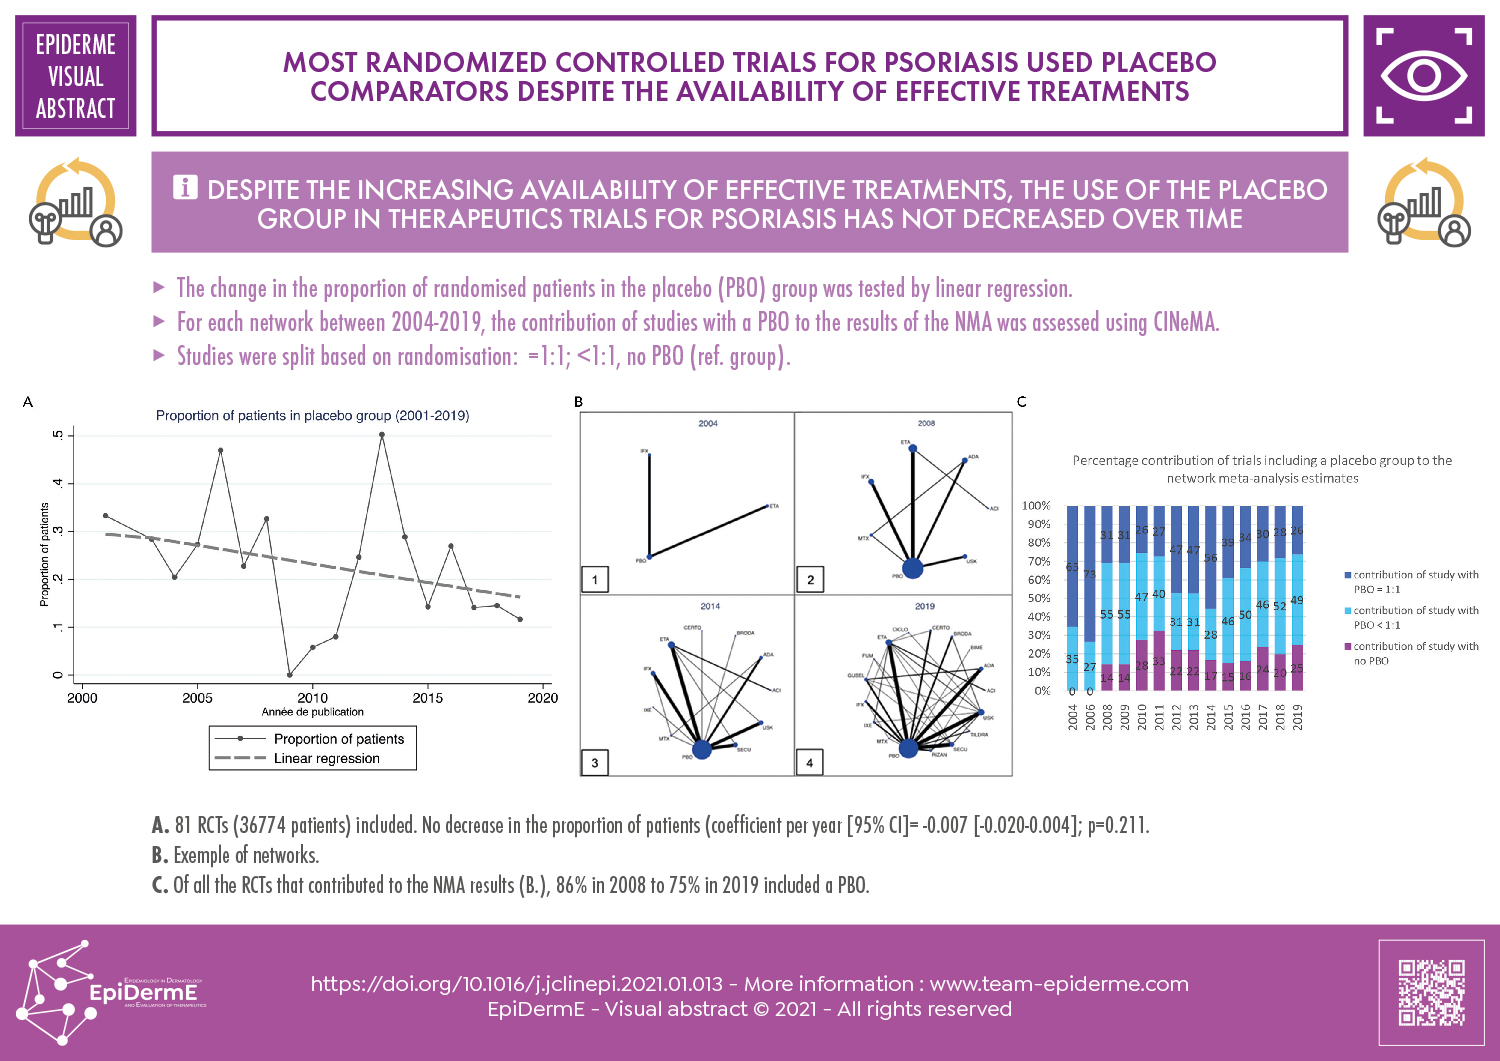 Most randomized controlled trials forpsoriasis used placebo comparators despite the availability of effective treatments